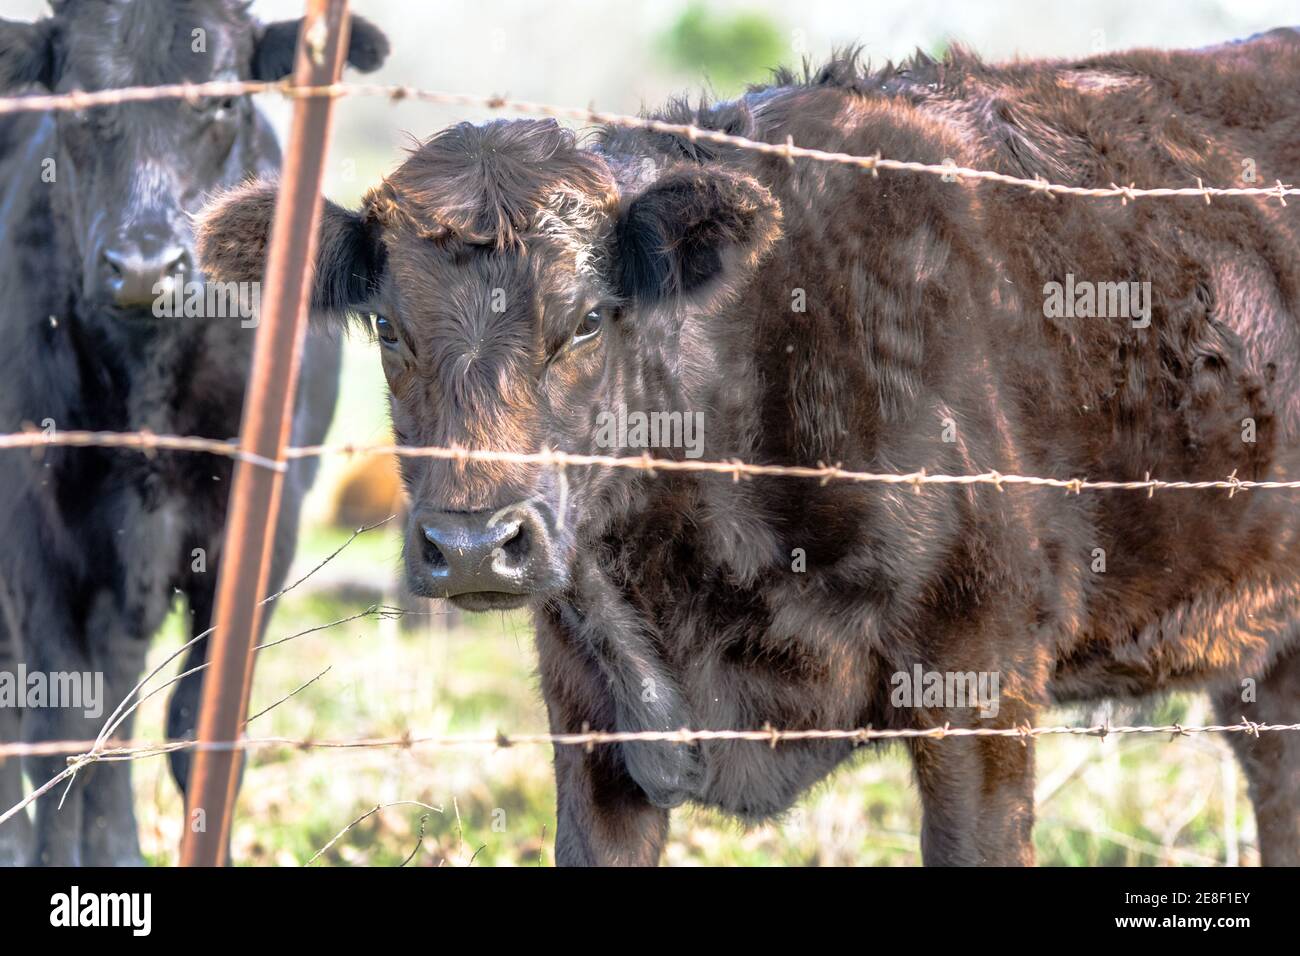 Black Angus crossbred cows standing behind a barbed wire fence, Stock Photo